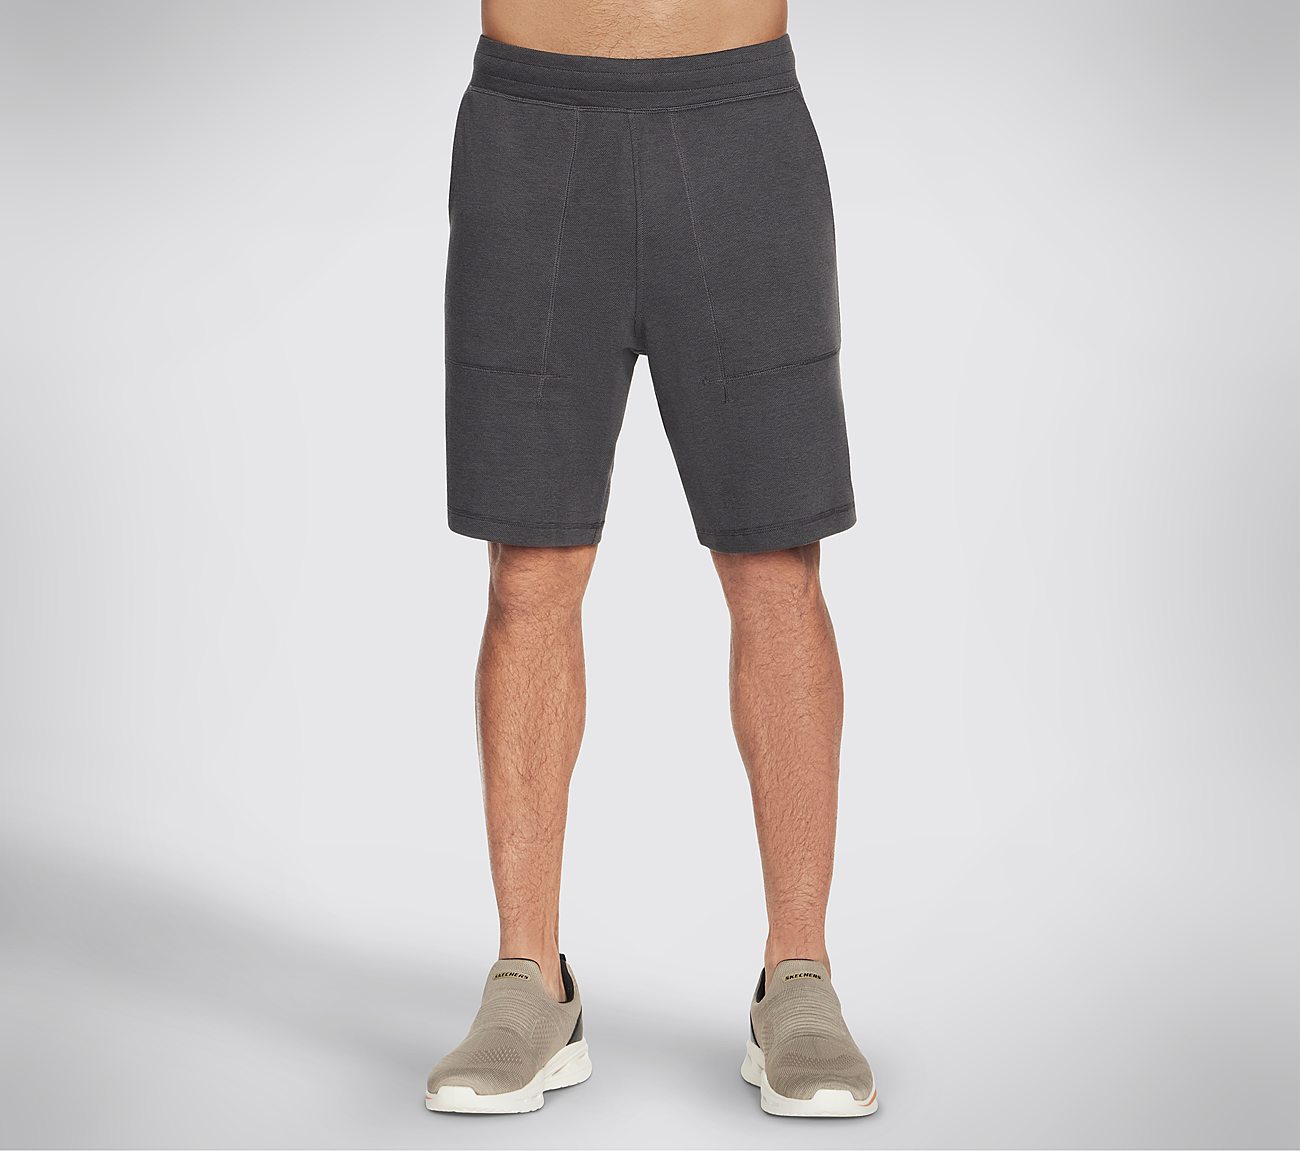 GOKNIT PIQUE 9IN SHORT, CCHARCOAL Apparel Lateral View